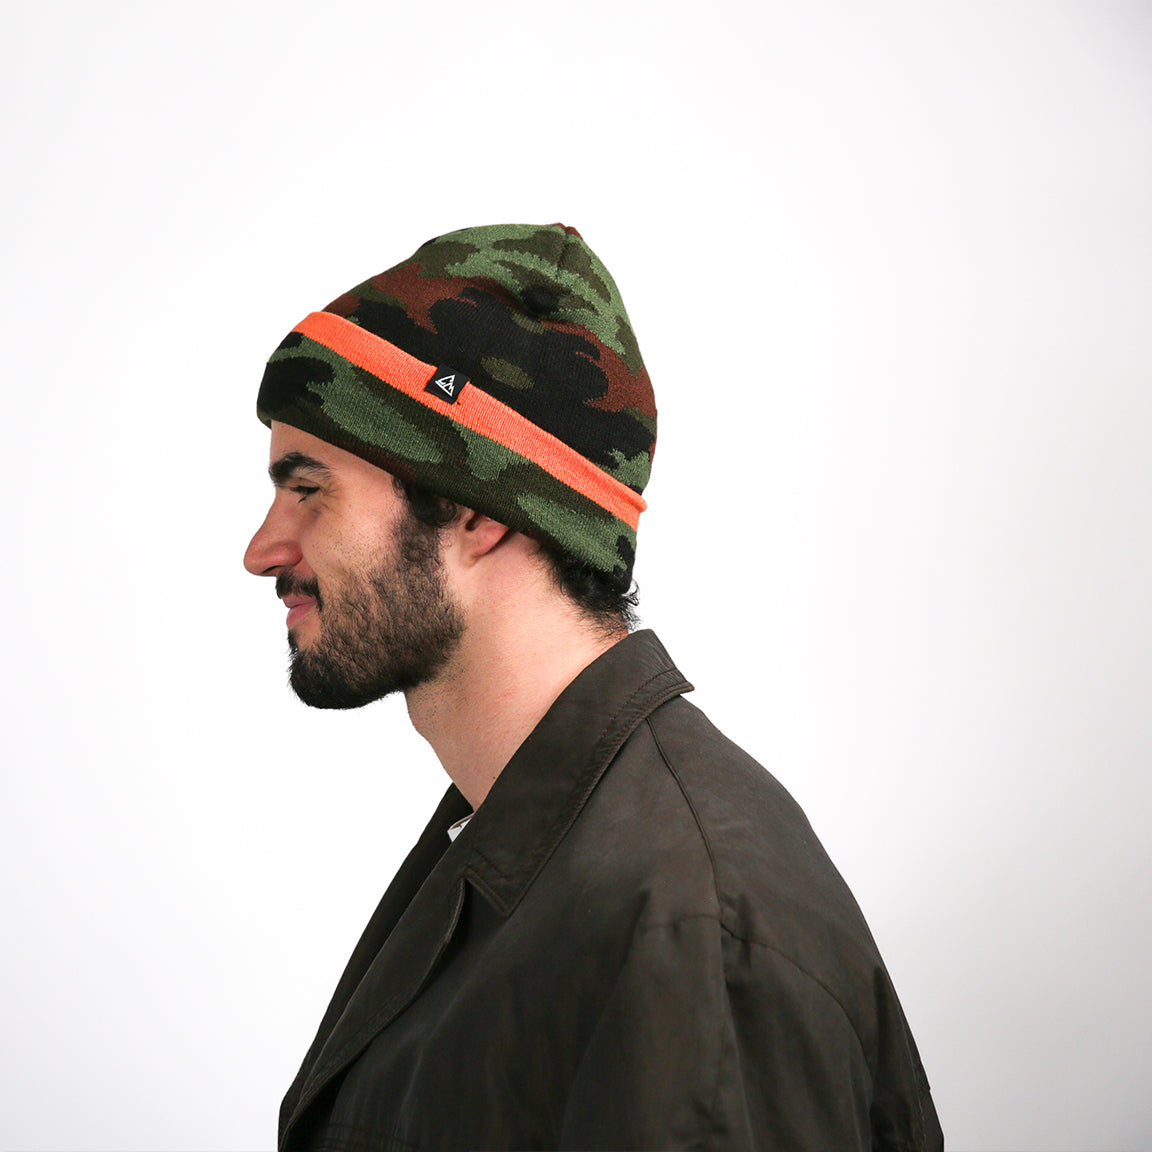 A side profile view of the same camouflage-patterned beanie. The orange stripe and black logo are visible on the side, contrasting with the camo design. The beanie maintains its slouchy shape towards the back.